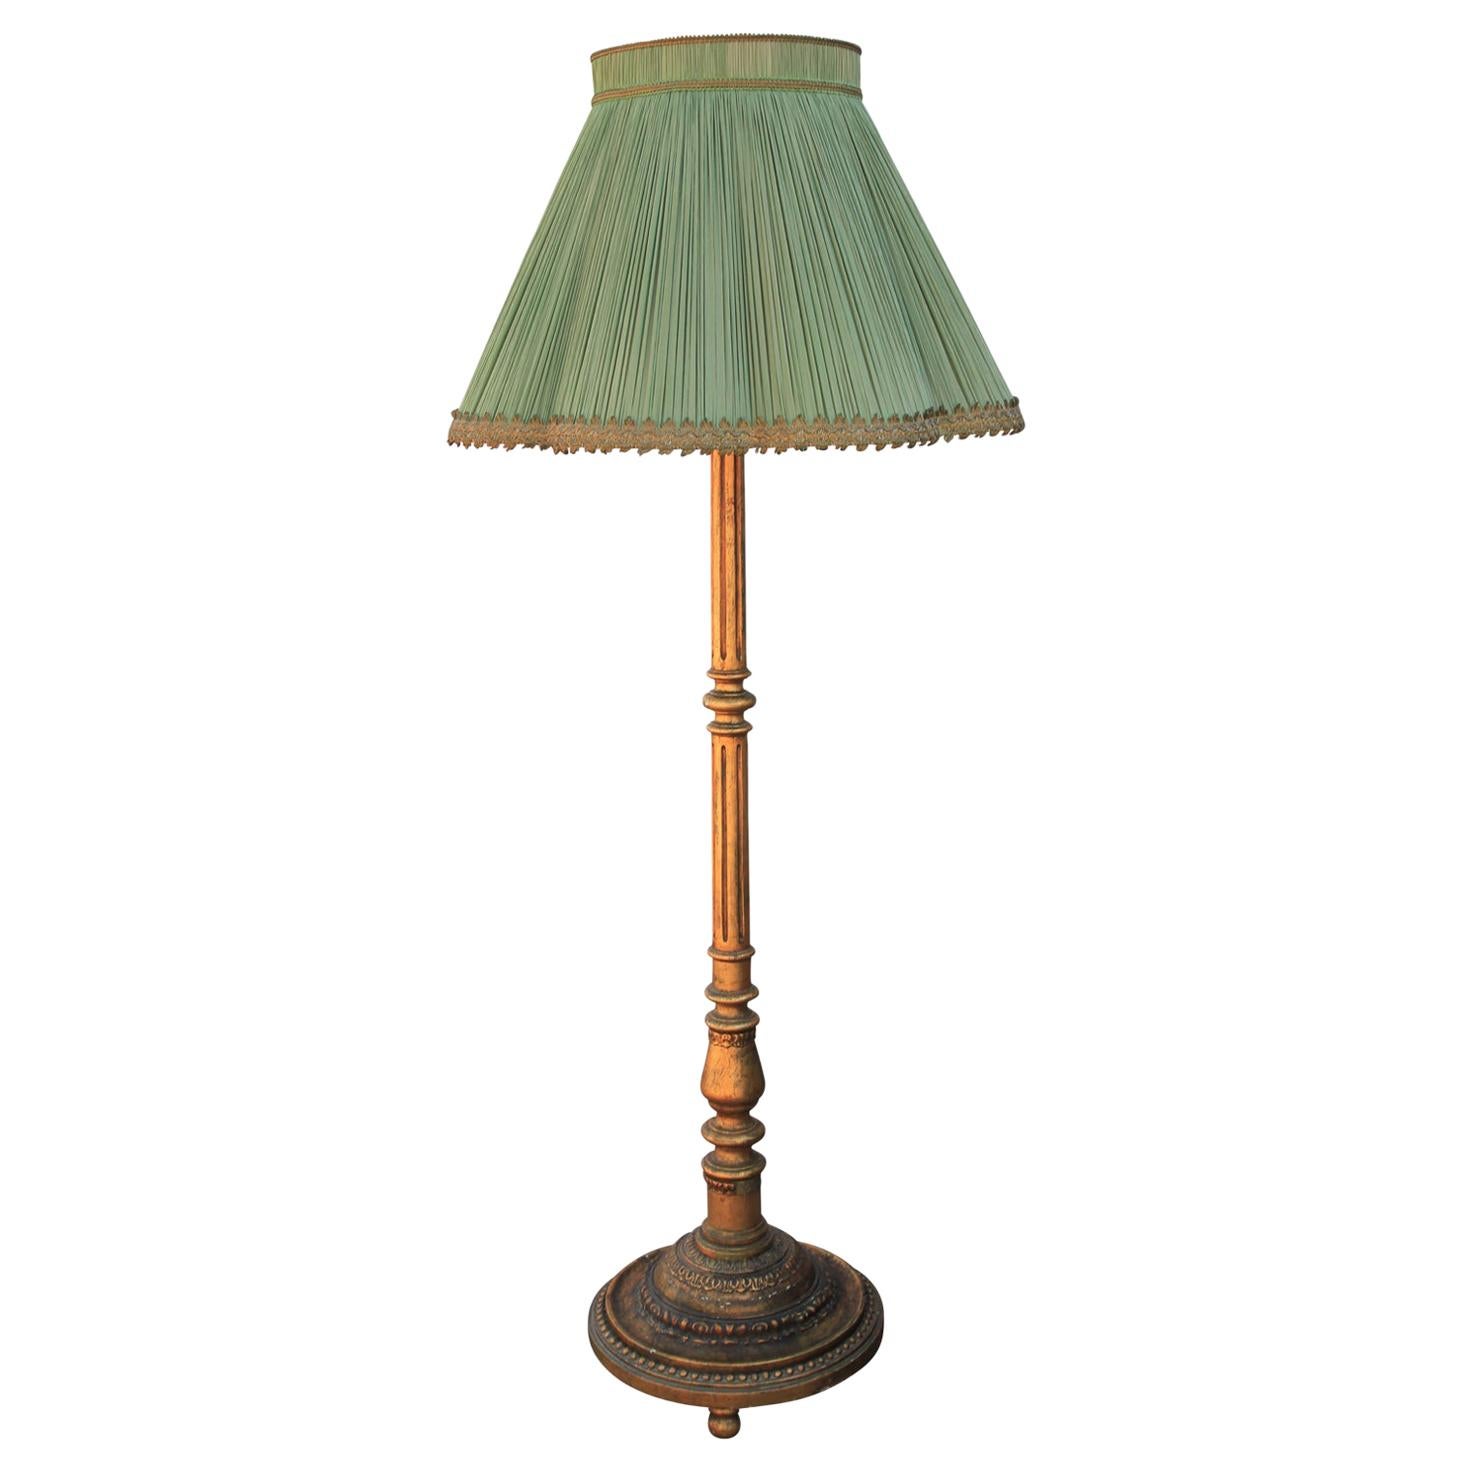 French Belle Époque Gold Gilt Carved Wood Large Floor Lamp Green Shade